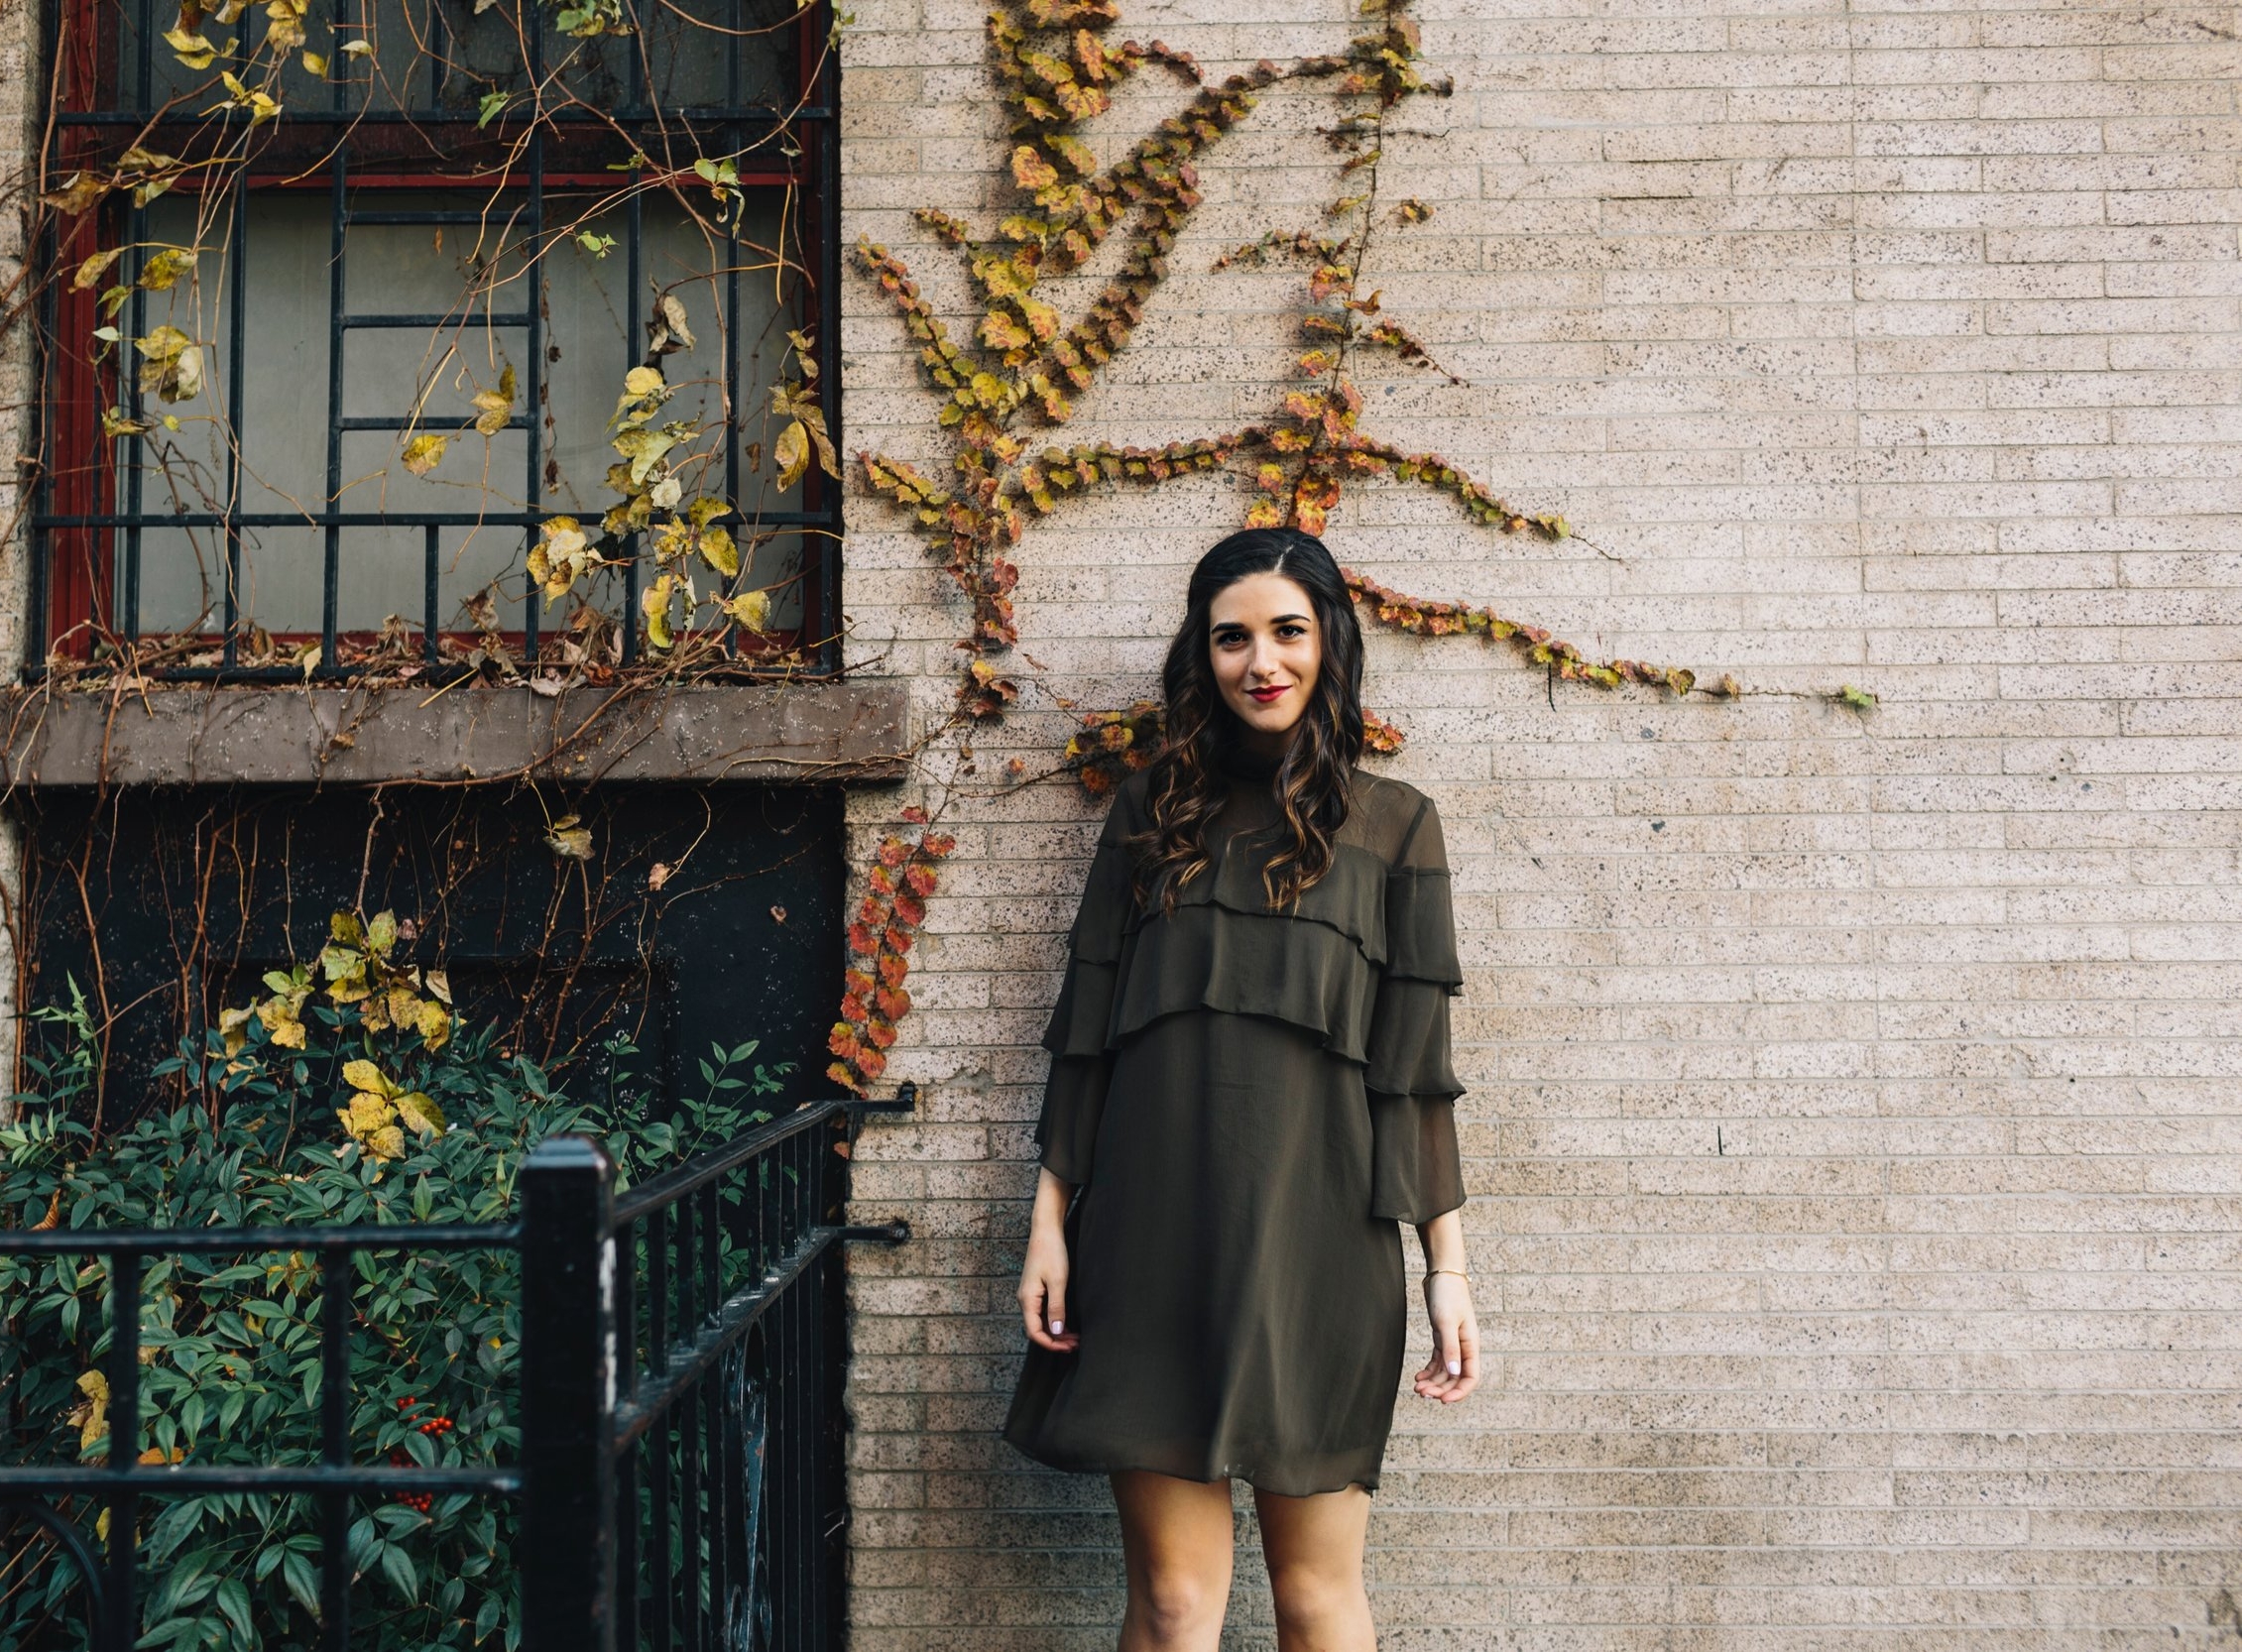 Olive Green Ruffle Dress + Lace Up Booties Payless Louboutins & Love Fashion Blog Esther Santer NYC Street Style Blogger Outfit OOTD Trendy Shoes Inspo Girly Fall Winter Shopping Affordable Boots Hair Photoshoot Wear Clothes Bracelet Pretty Beautiful.JPG